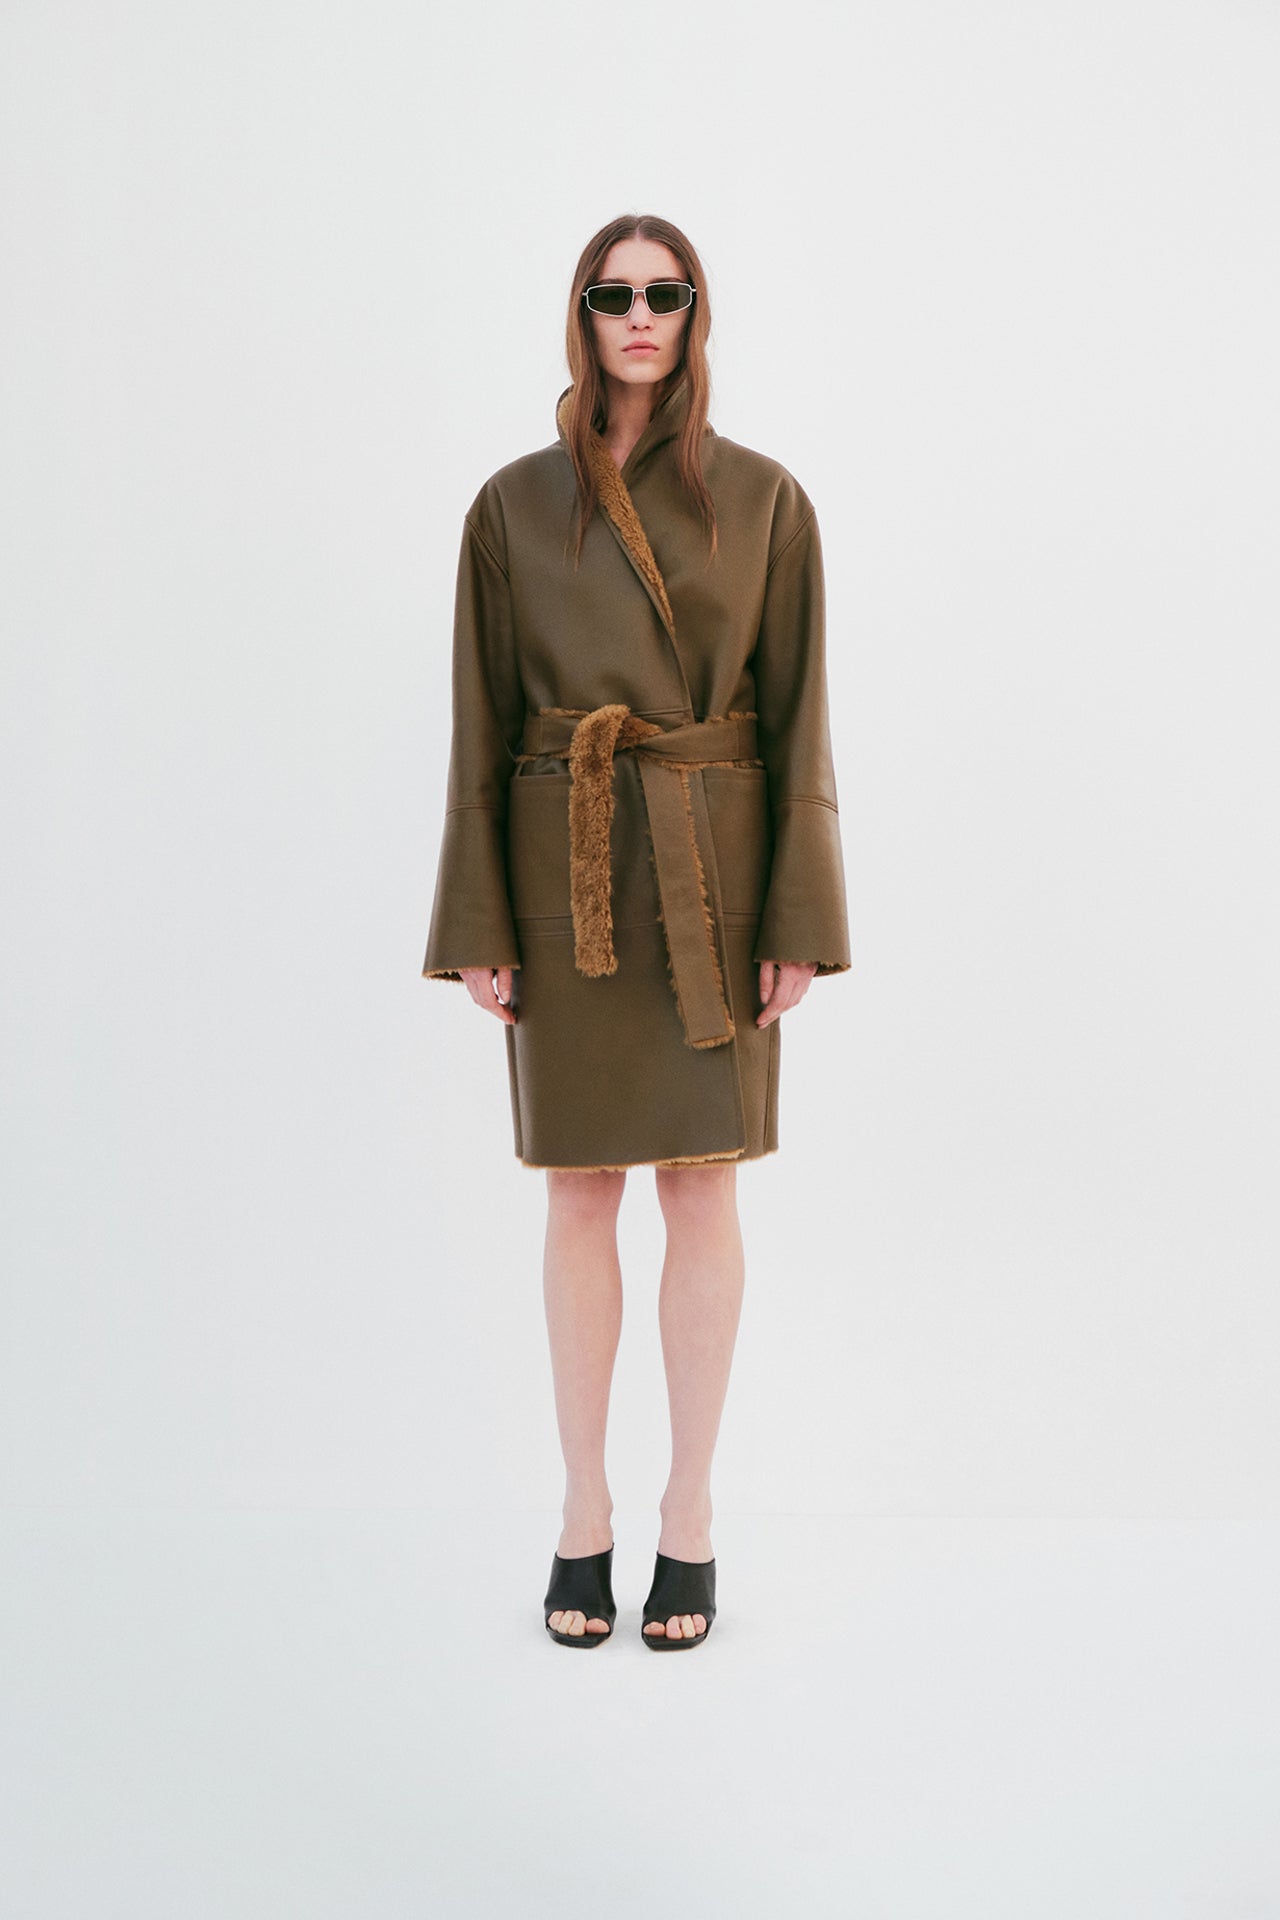 "Robe" Shearling Coat - Olive - Common Leisure 